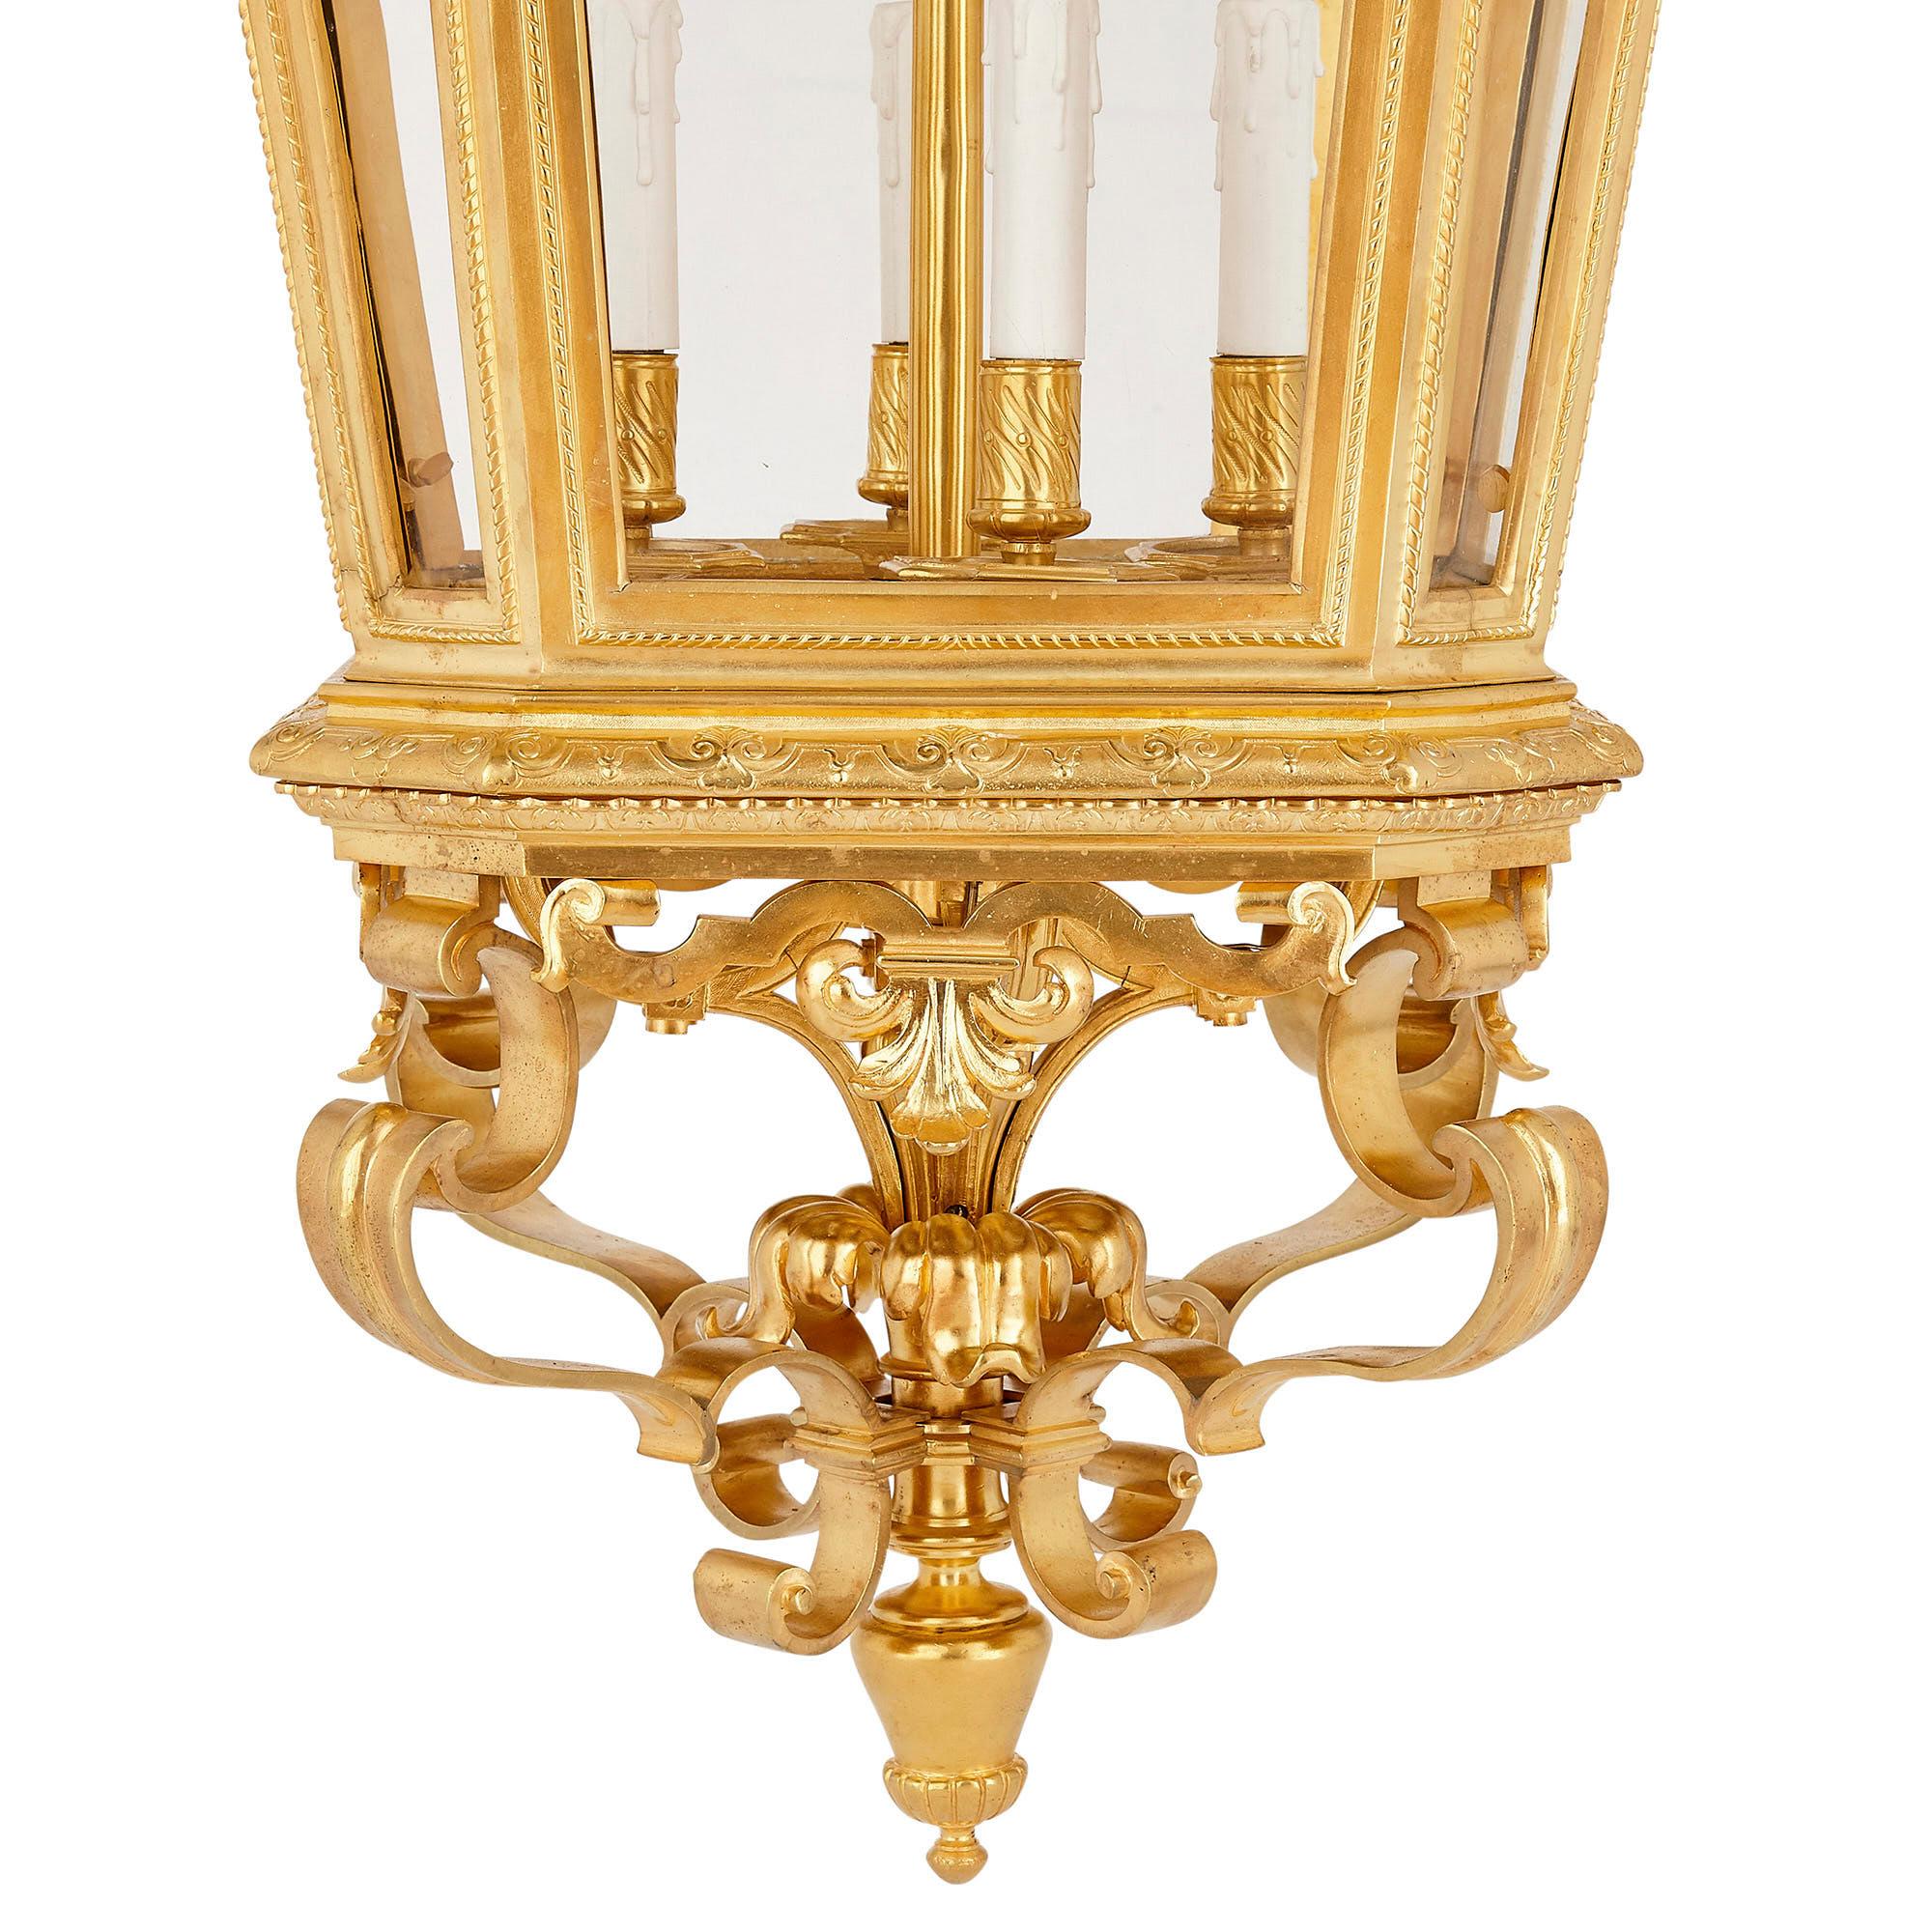 Very Large Napoleon III Period Rococo Style Gilt Bronze Lantern In Good Condition For Sale In London, GB